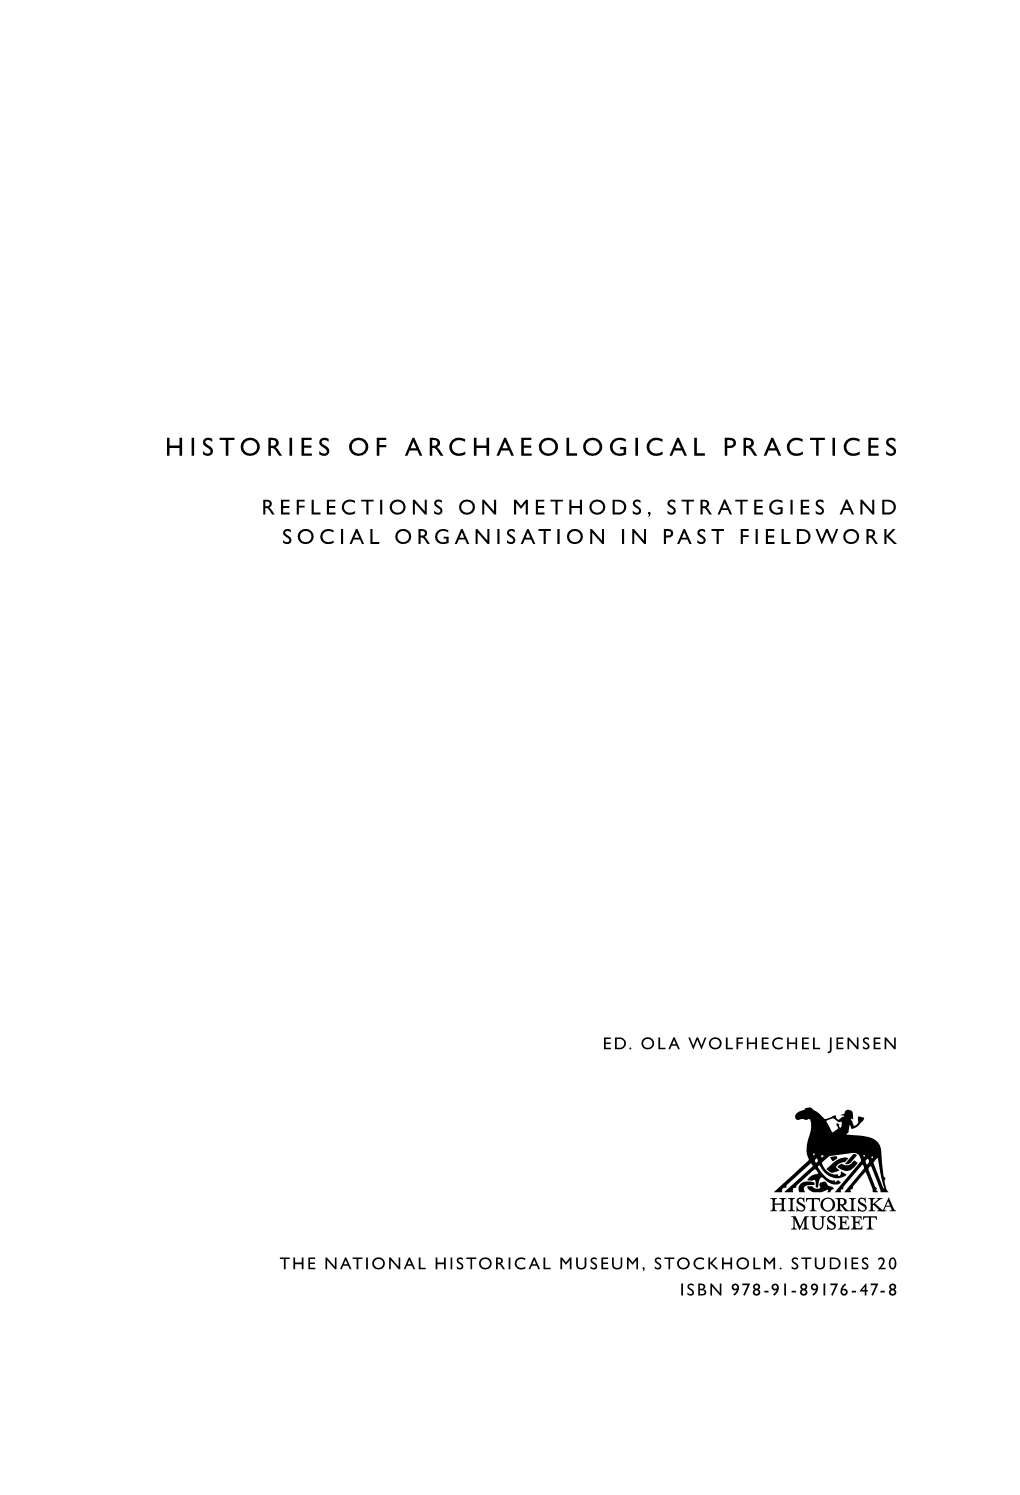 Histories of Archaeological Practices